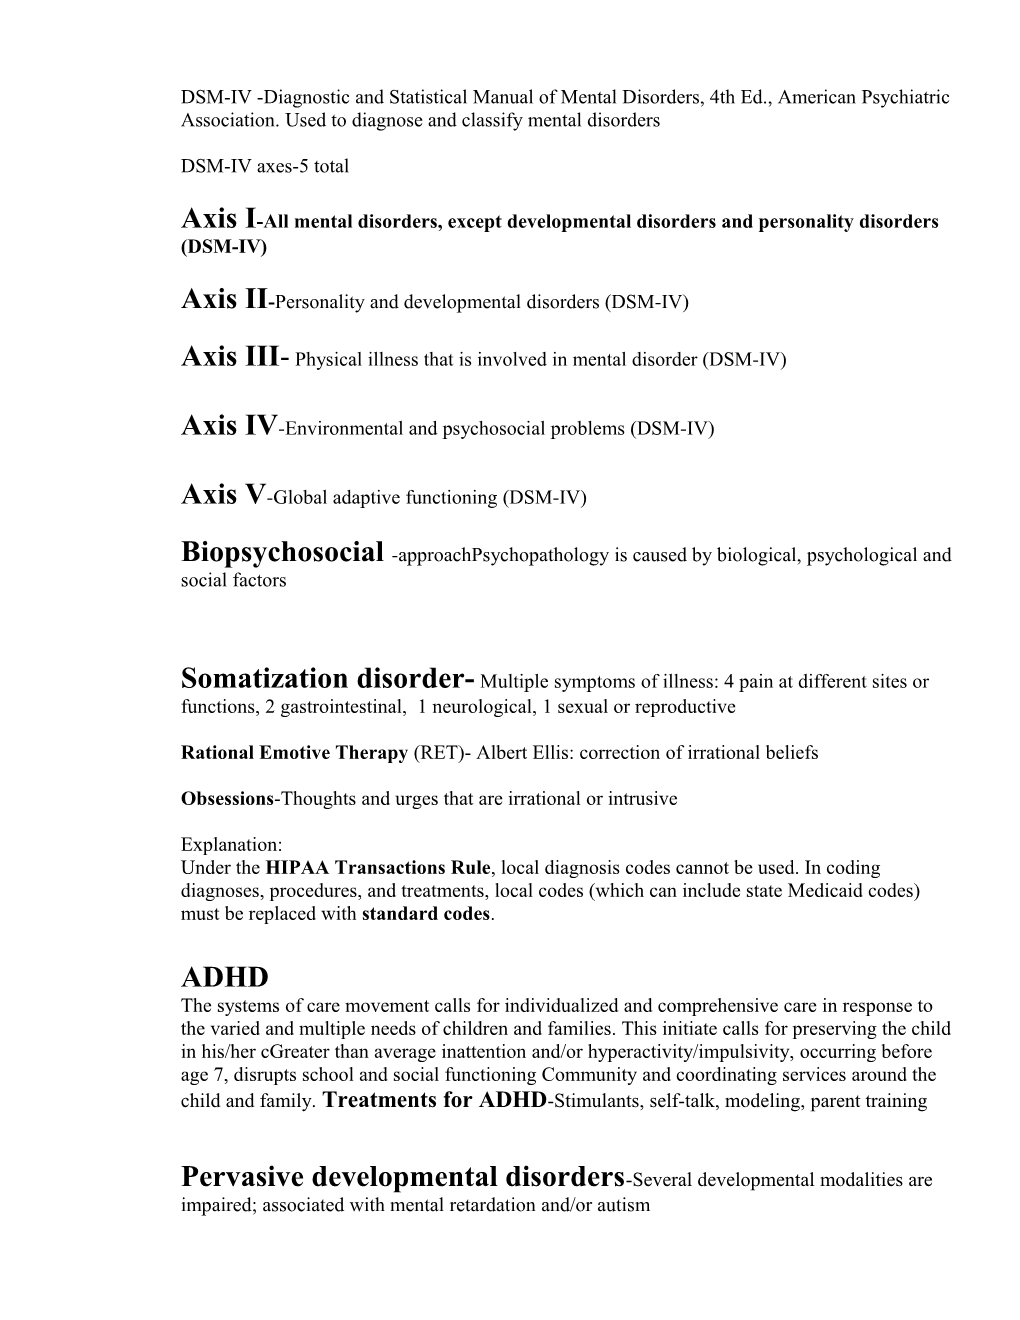 Axis I-All Mental Disorders, Except Developmental Disorders And Personality Disorders (DSM-IV)